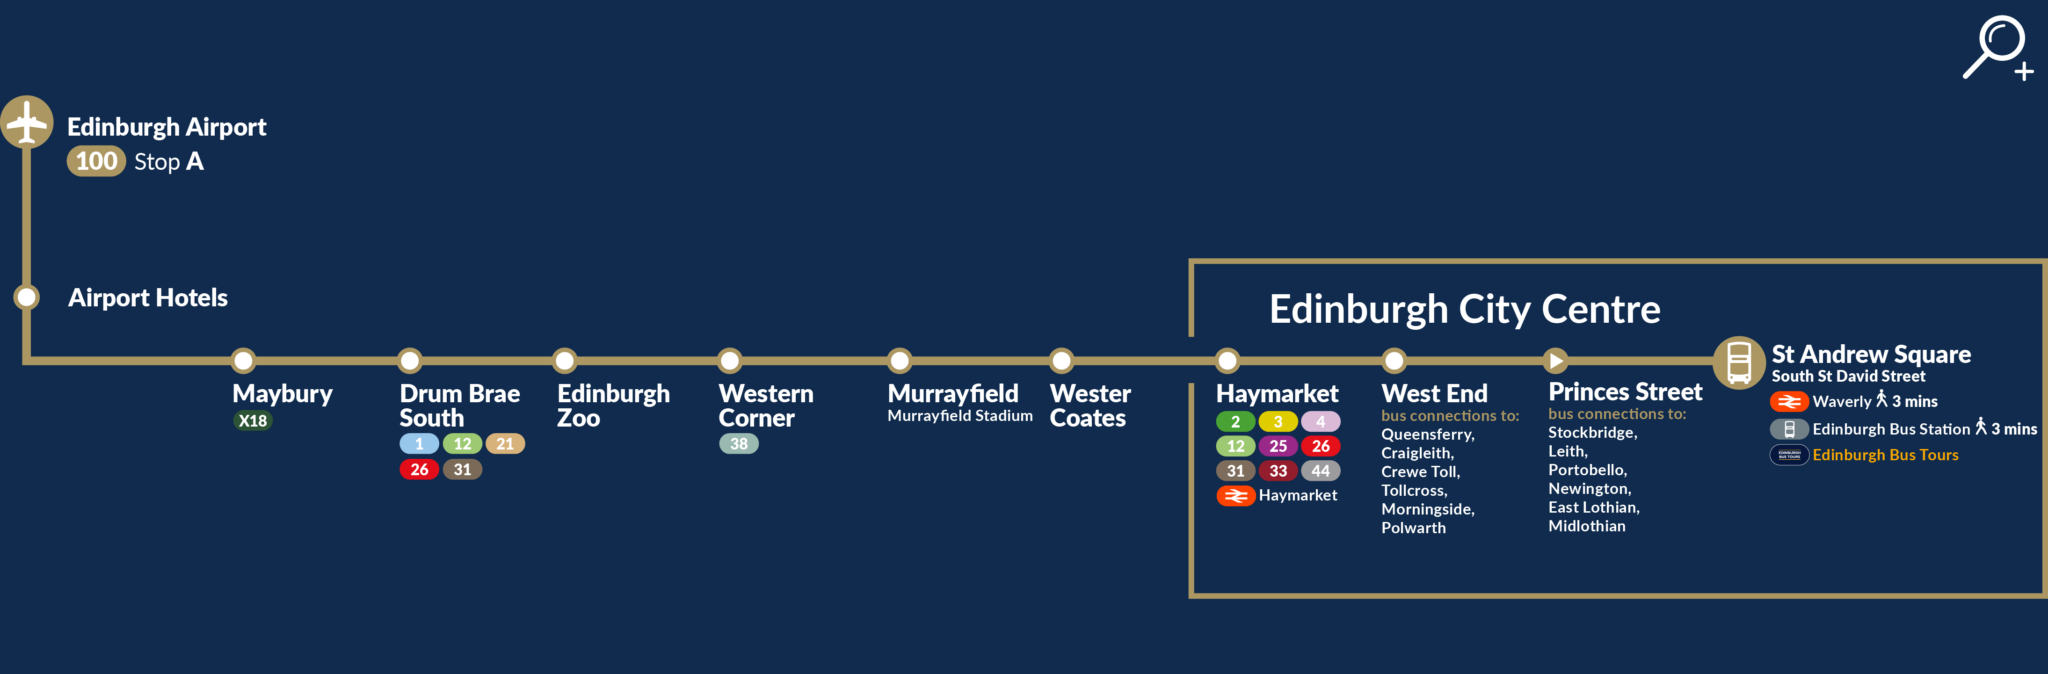 Airlink Route Map with Connections